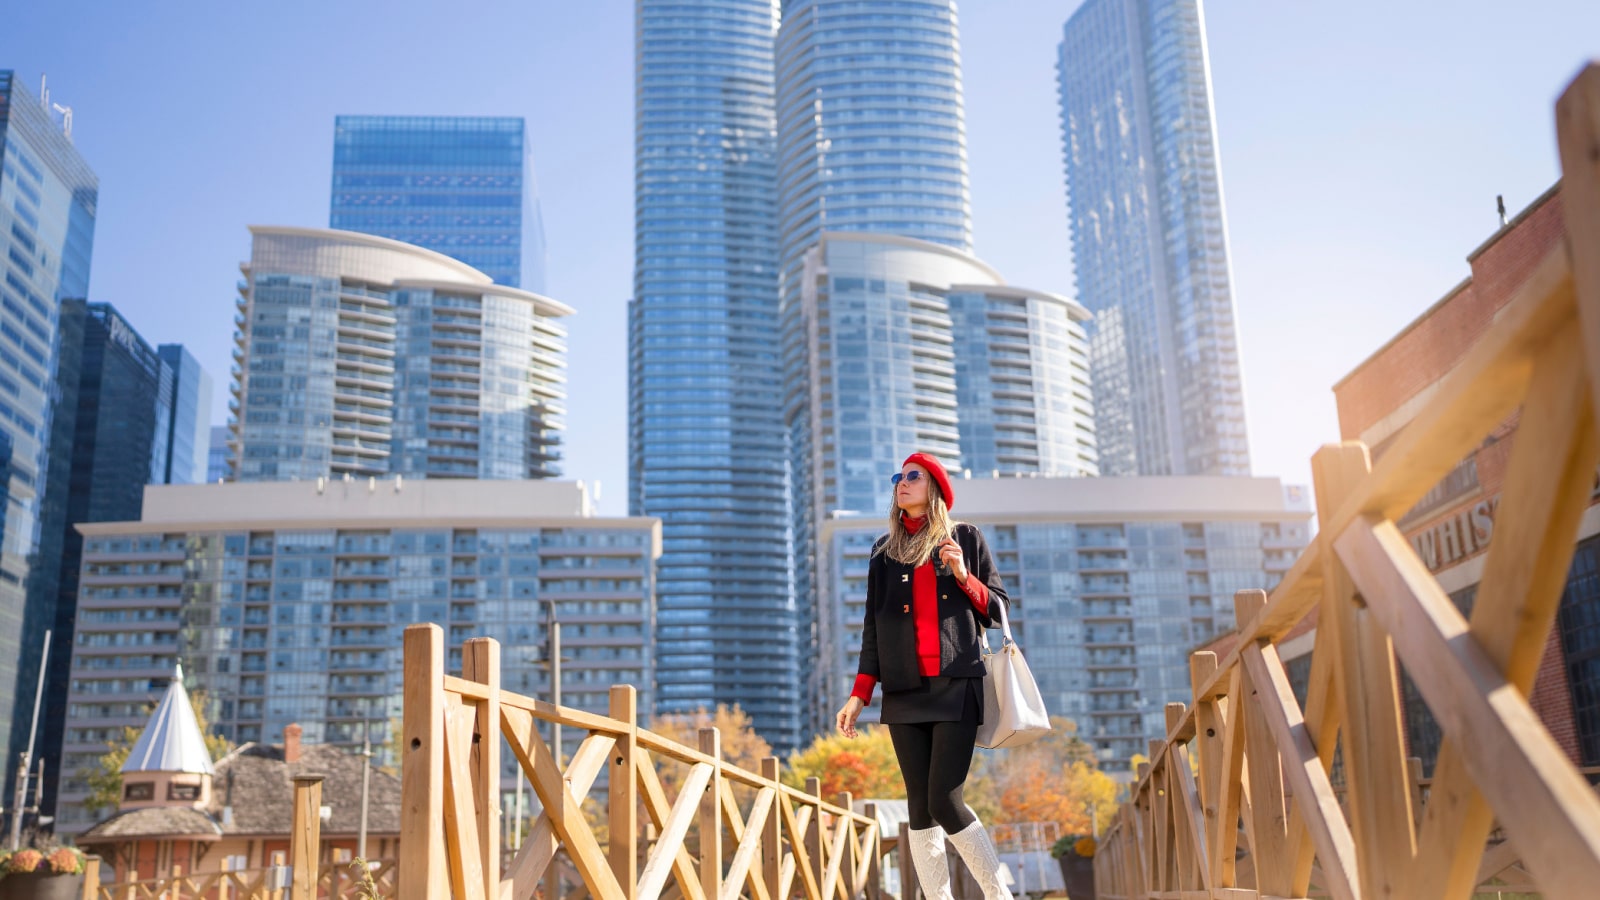 Business woman in city center looking at view of skyline skyscrapers in Toronto downtown , Canada. High quality photo